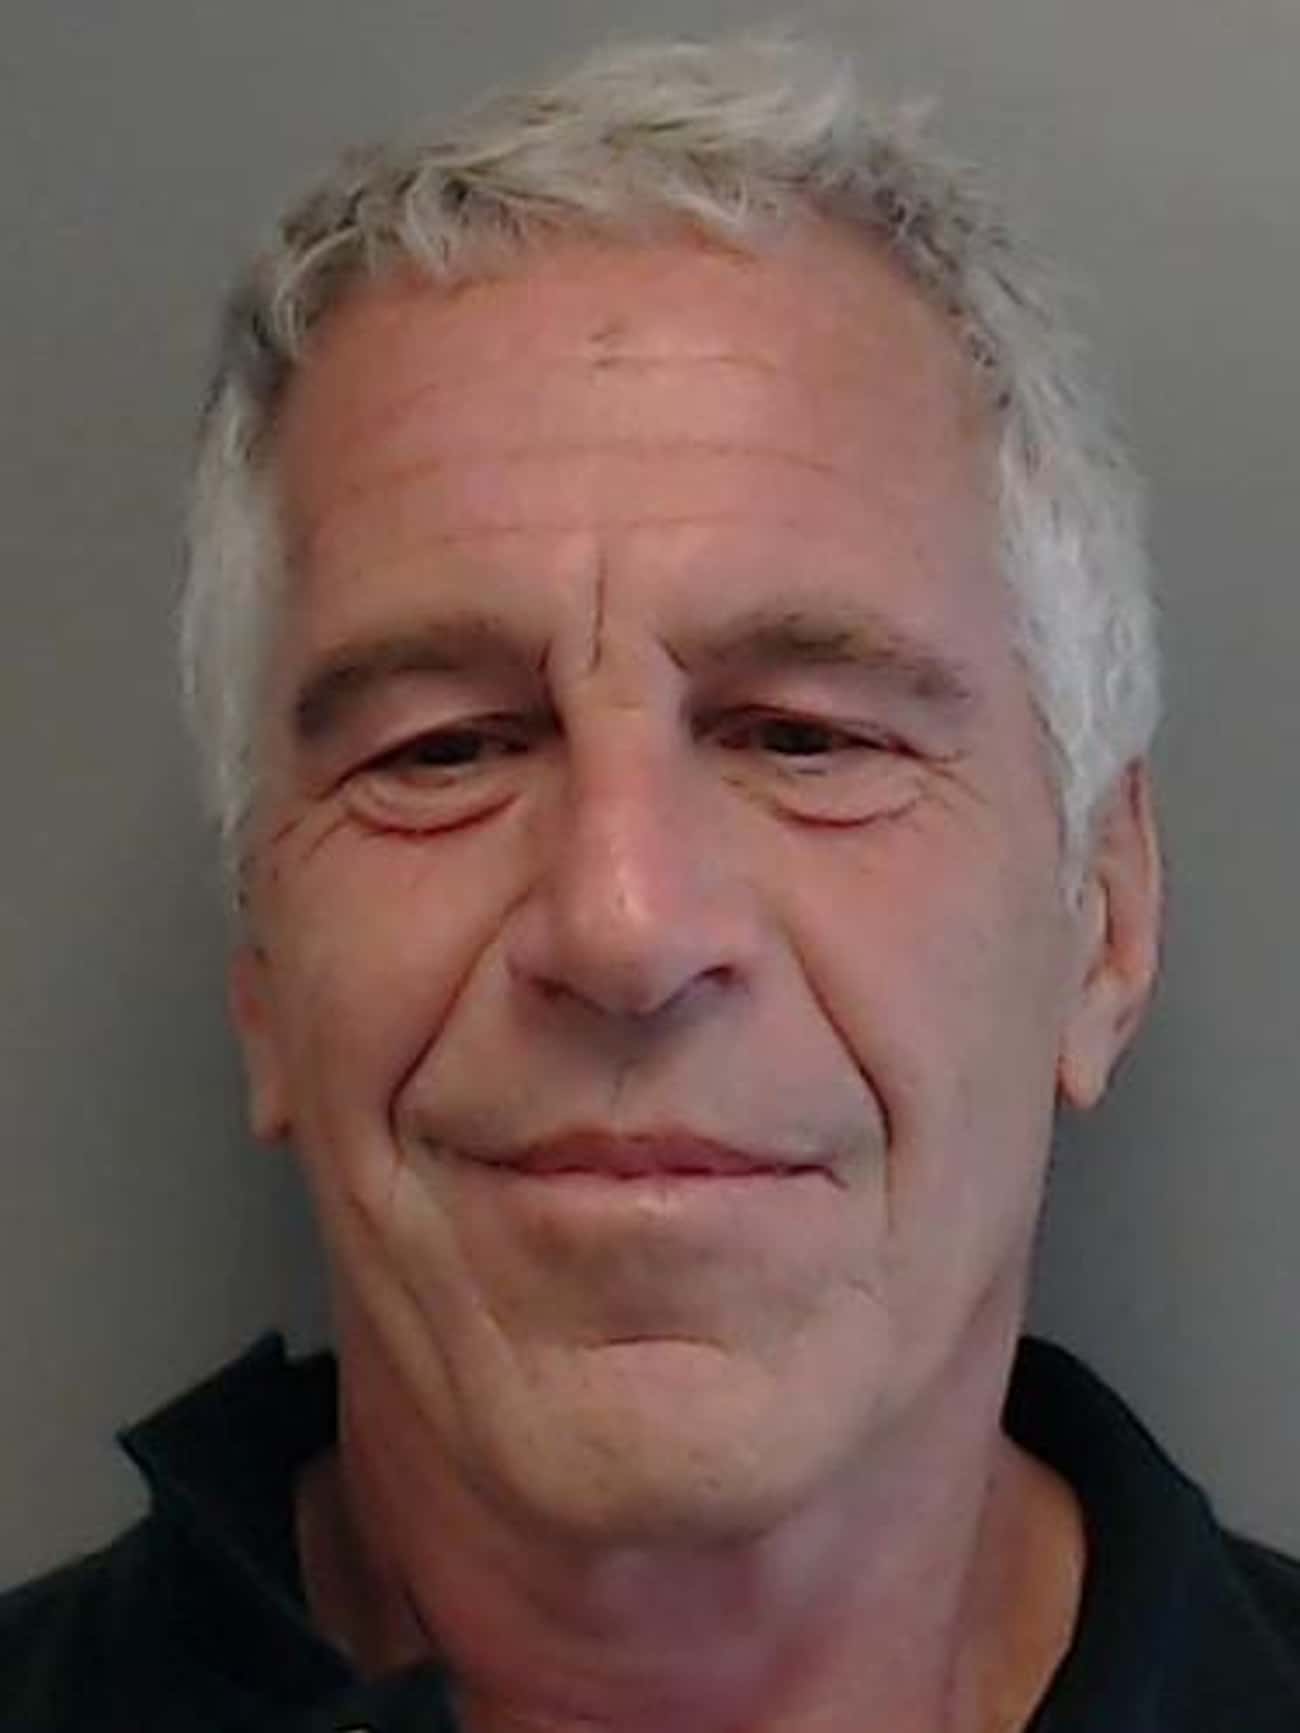 His Friend Jeffrey Epstein Was A Convicted Pedophile Who Ran A Sex Ring